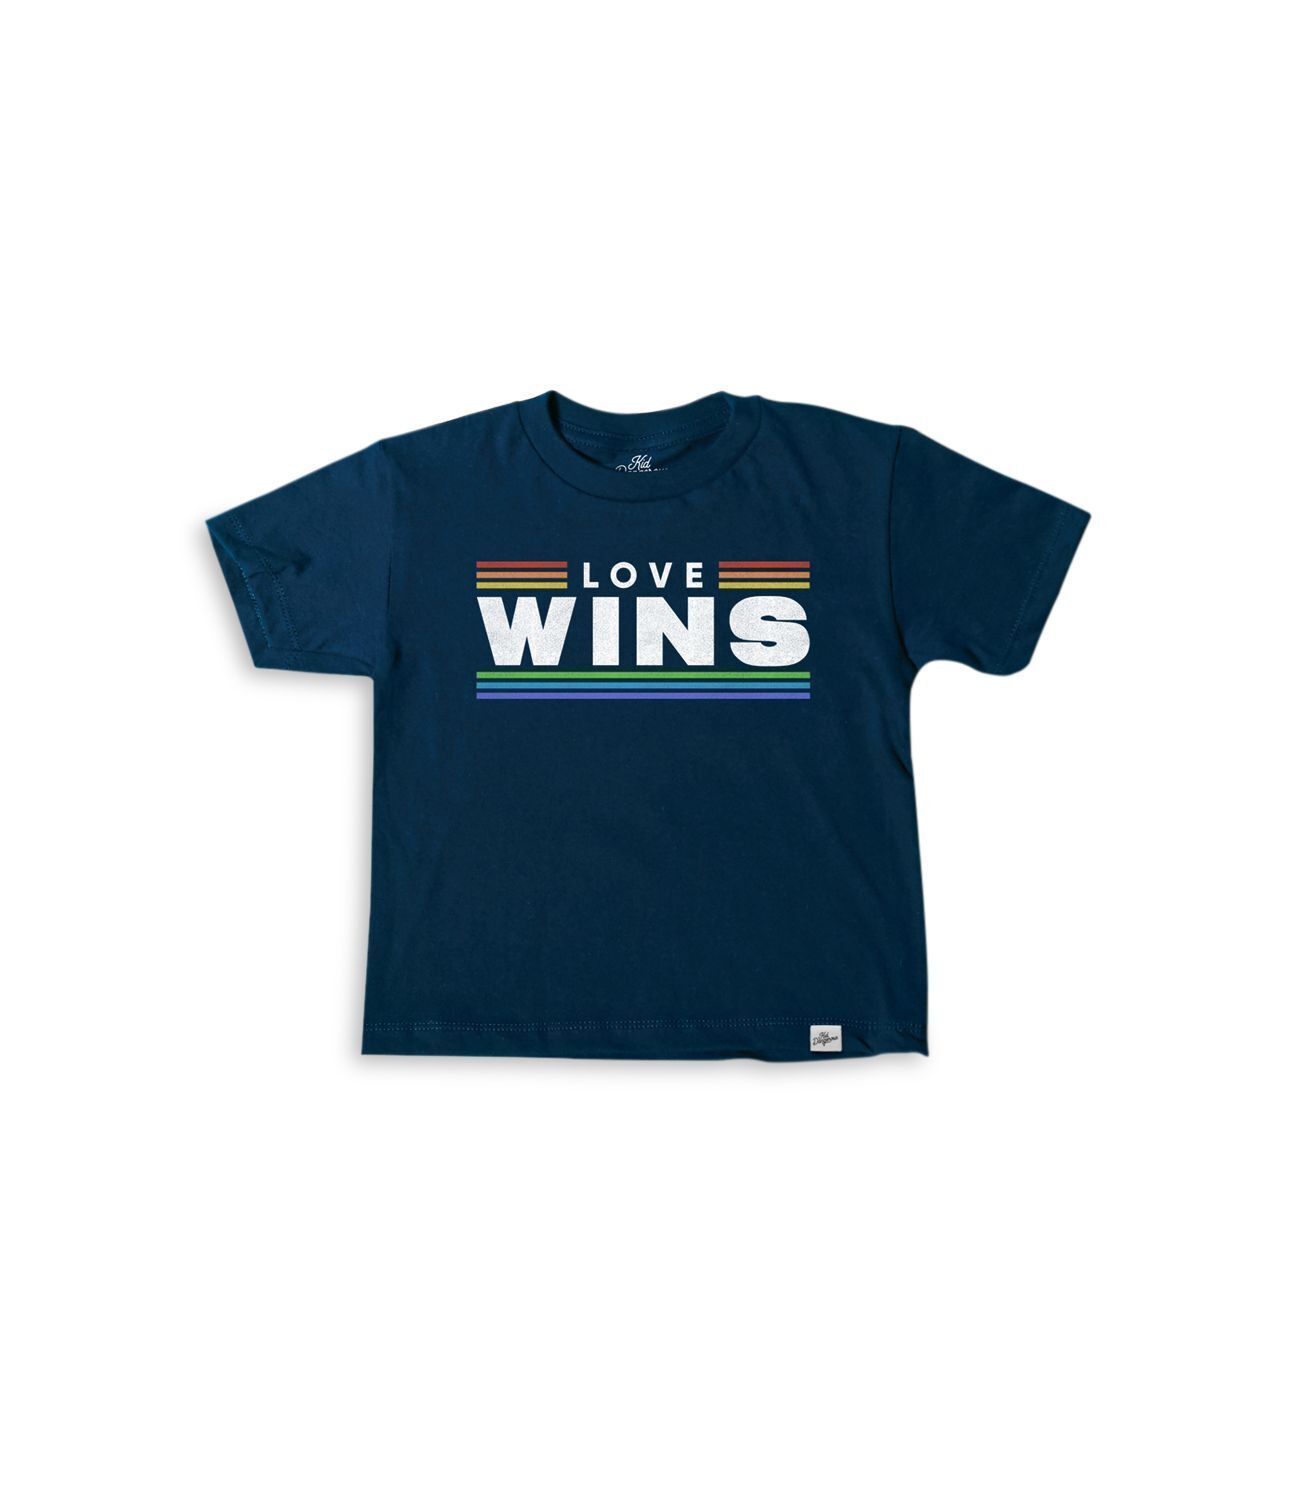 Primary image for Kid Dangerous Little & Big Kid Boys Love Wins Graphic Tee,Navy,3